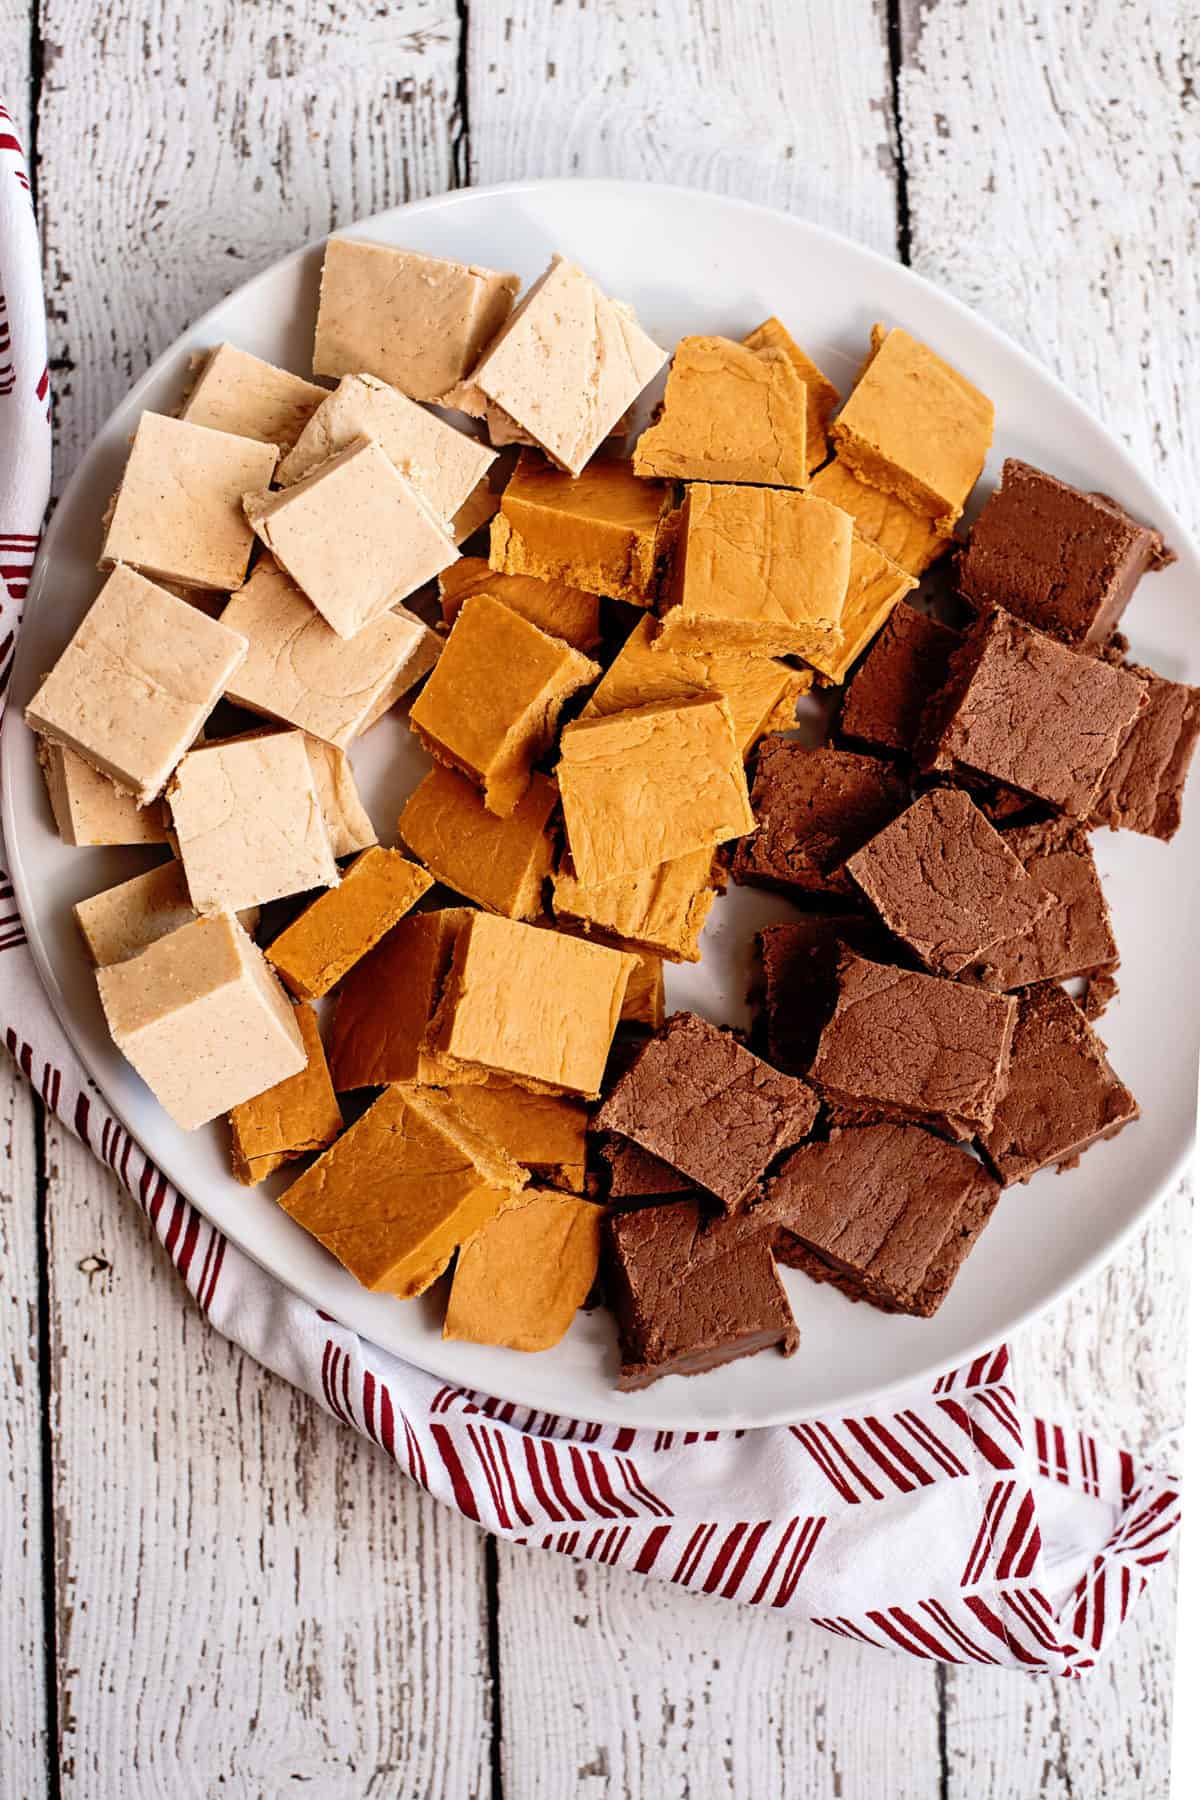 Platter filled with three different flavors of homemade fudge.